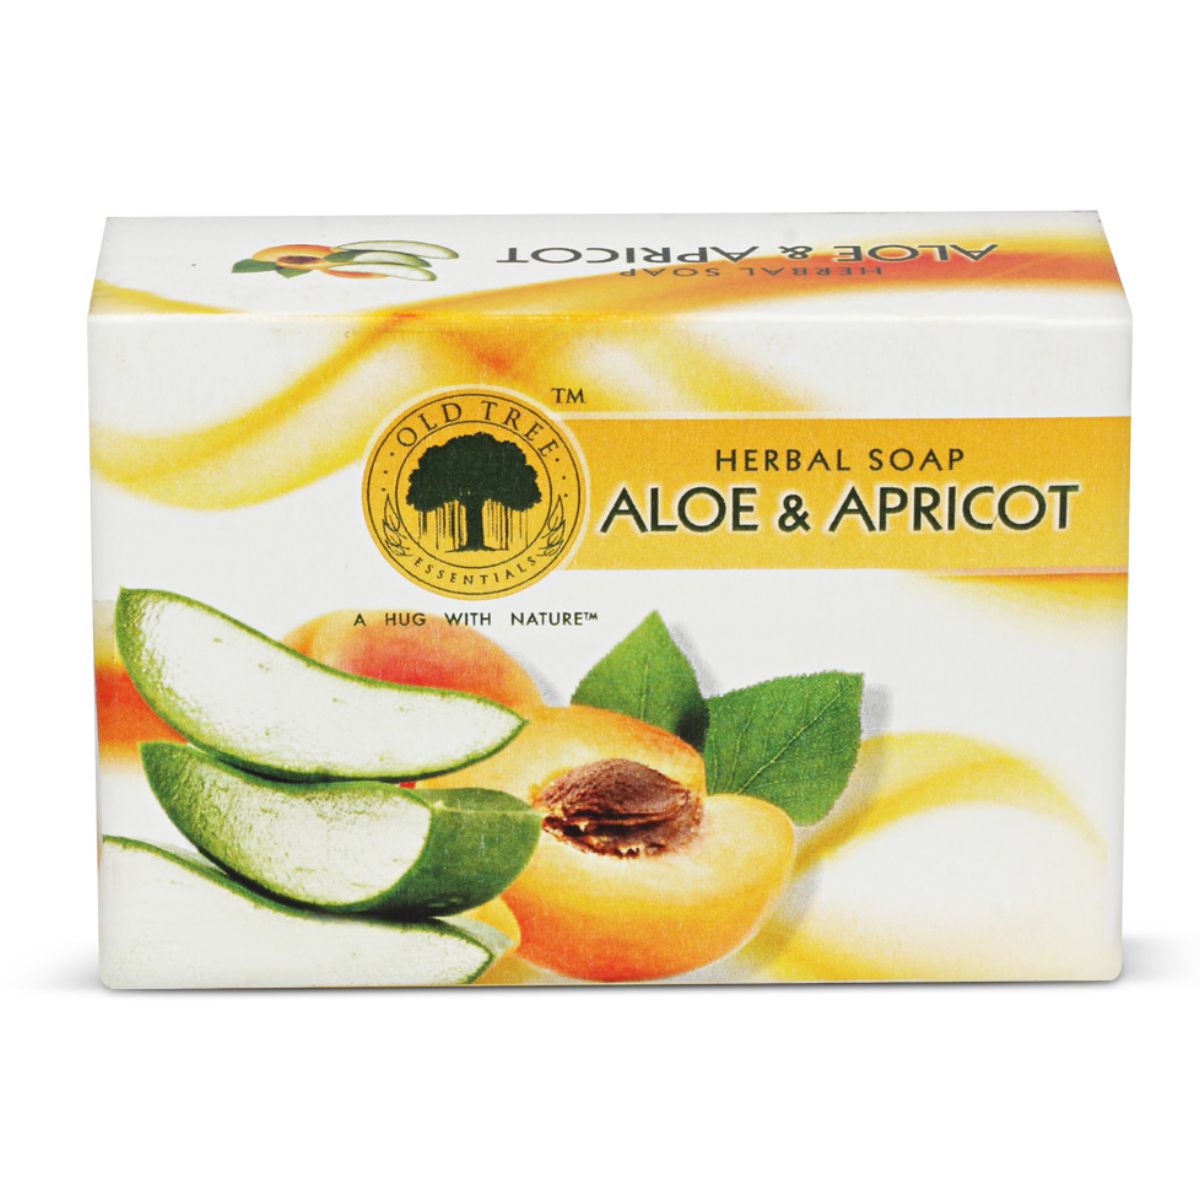 Old Tree Aloe & Apricot Soap, It moisturize the skin and prevent skin irritation and dry skin
Visit oldtreebrand.com

#oldtree #aloevera #apricot #aloeverasoap #apricotsoap #skincare #skincareproducts #herbalproducts #naturalproducts #haircare #beautifulskin #chemicalfree